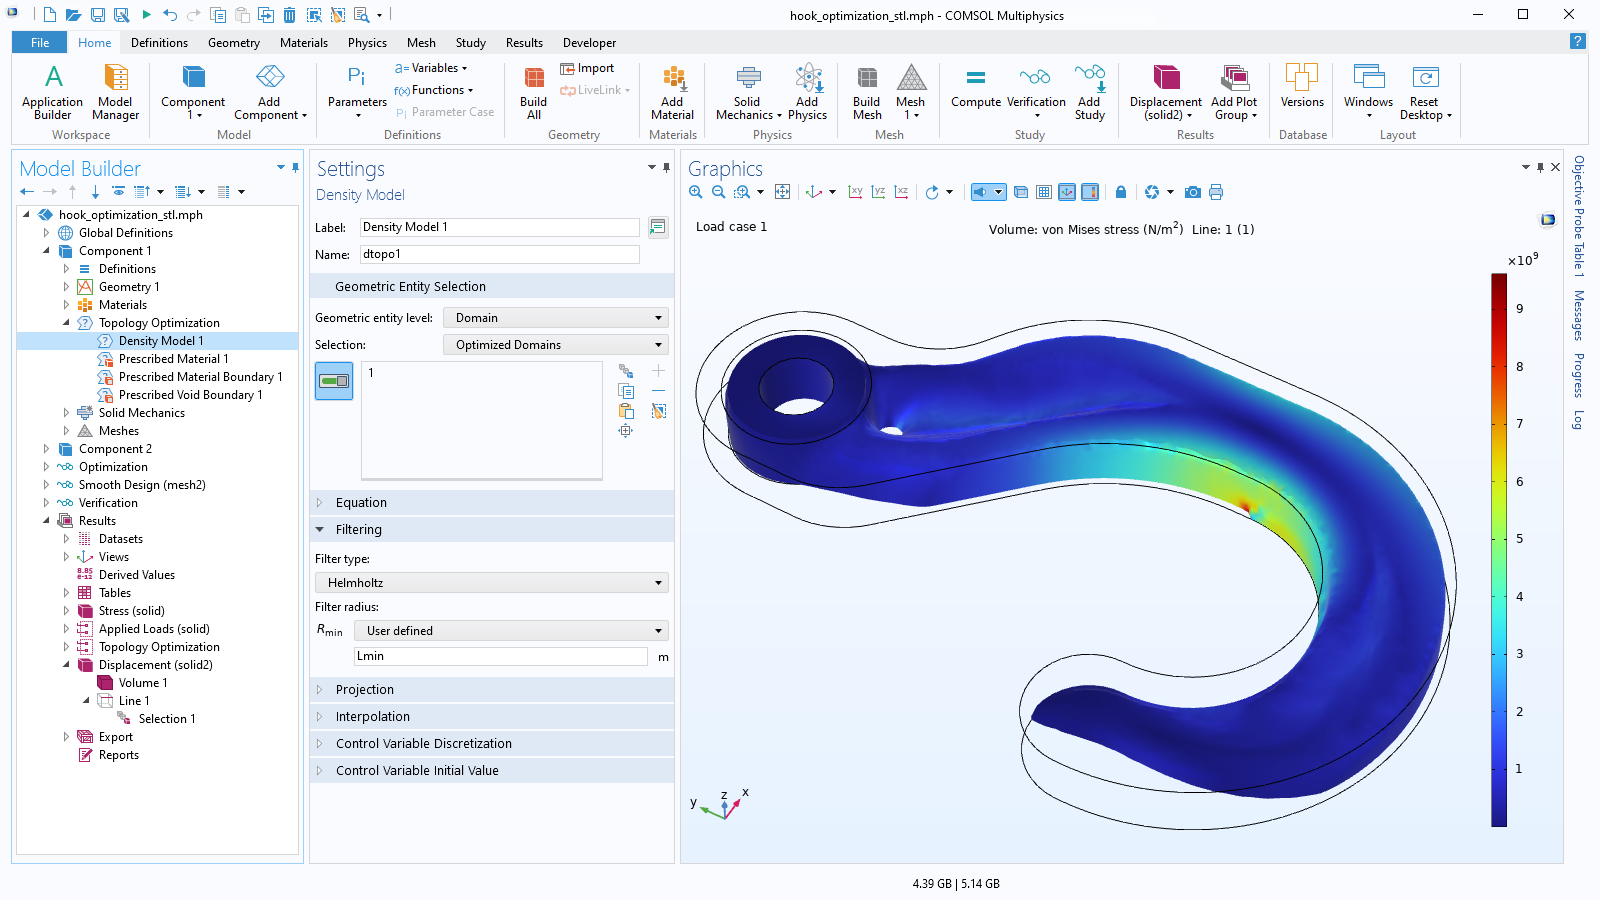 The COMSOL Multiphysics UI showing the Model Builder with the Density Model node highlighted, the corresponding Settings window, and an optimized hook model in the Graphics window.